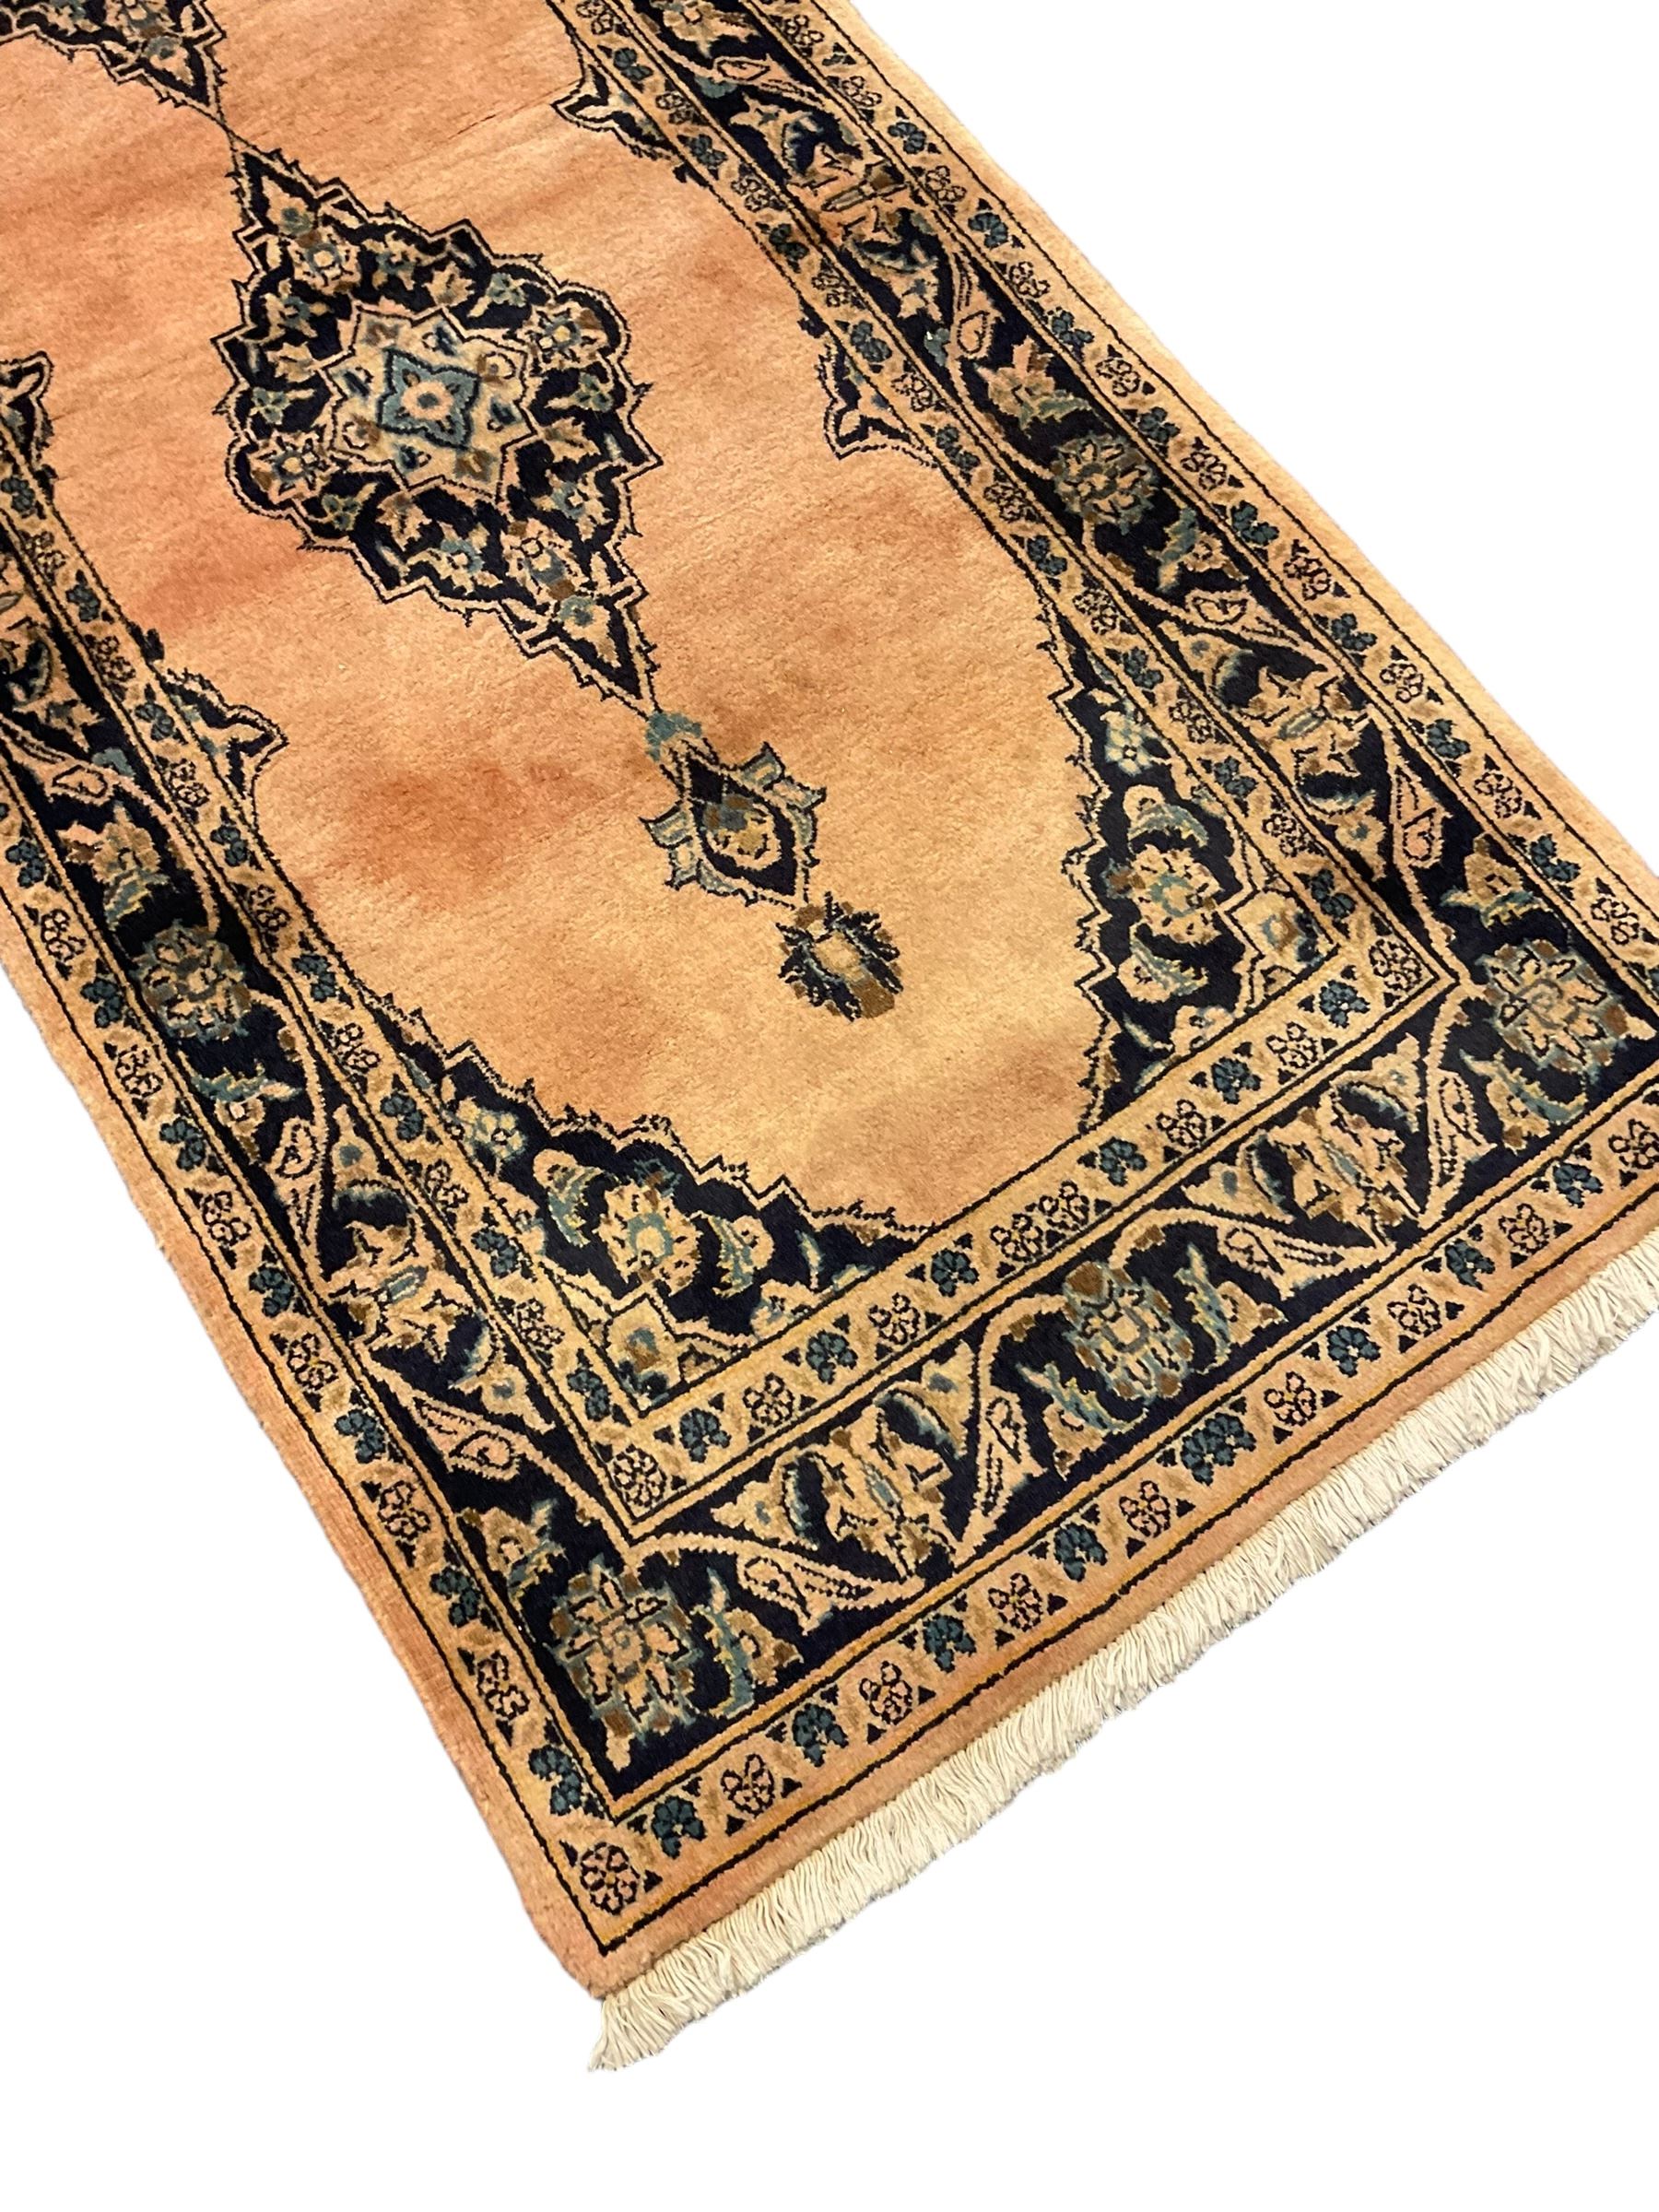 Persian pale peach ground rug - Image 6 of 6